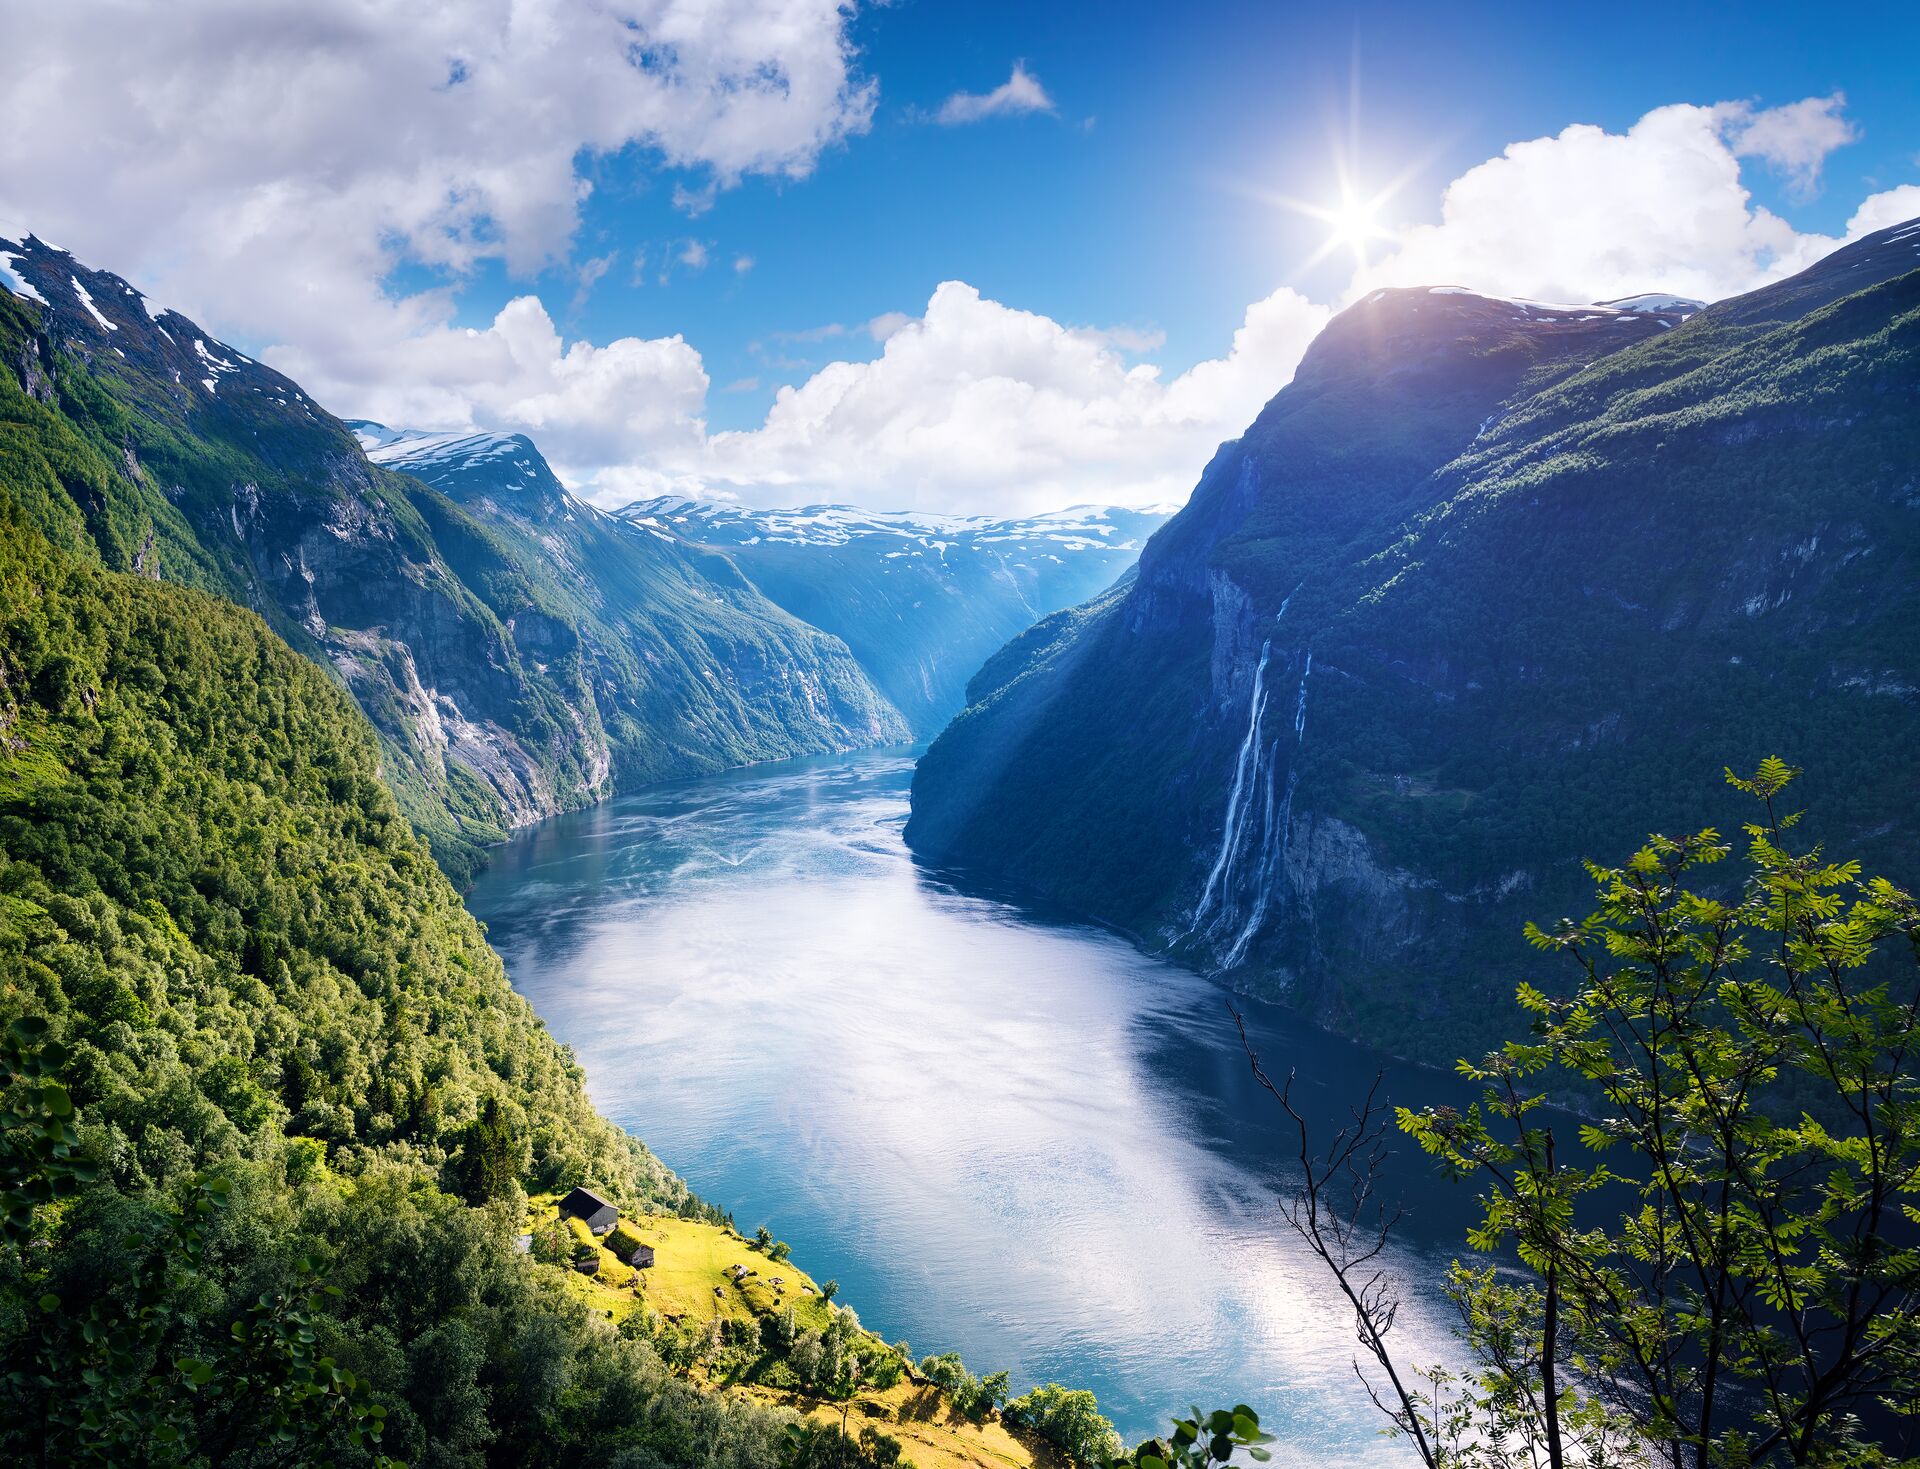 Legends of the fjords: discover Norway’s Viking connections